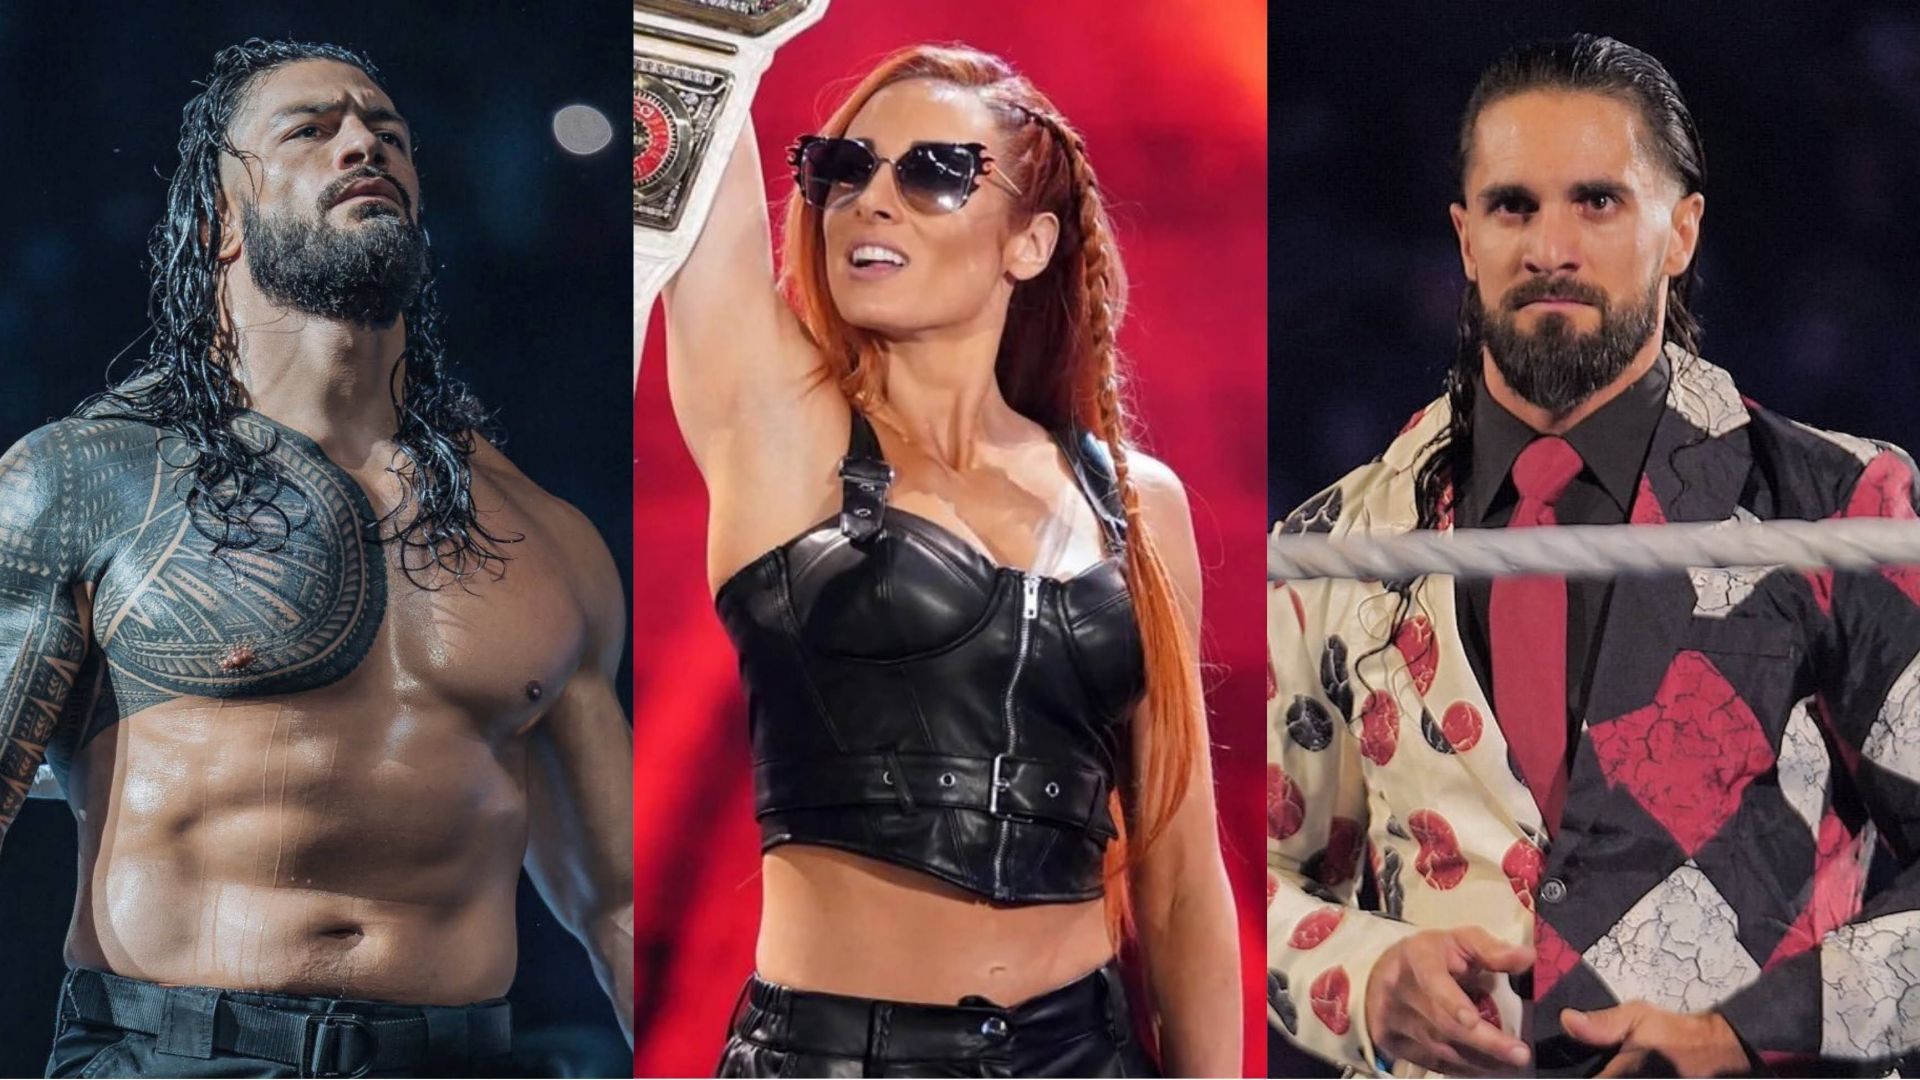 Roman Reigns (left), Becky Lynch (middle), and Seth Rollins (right)